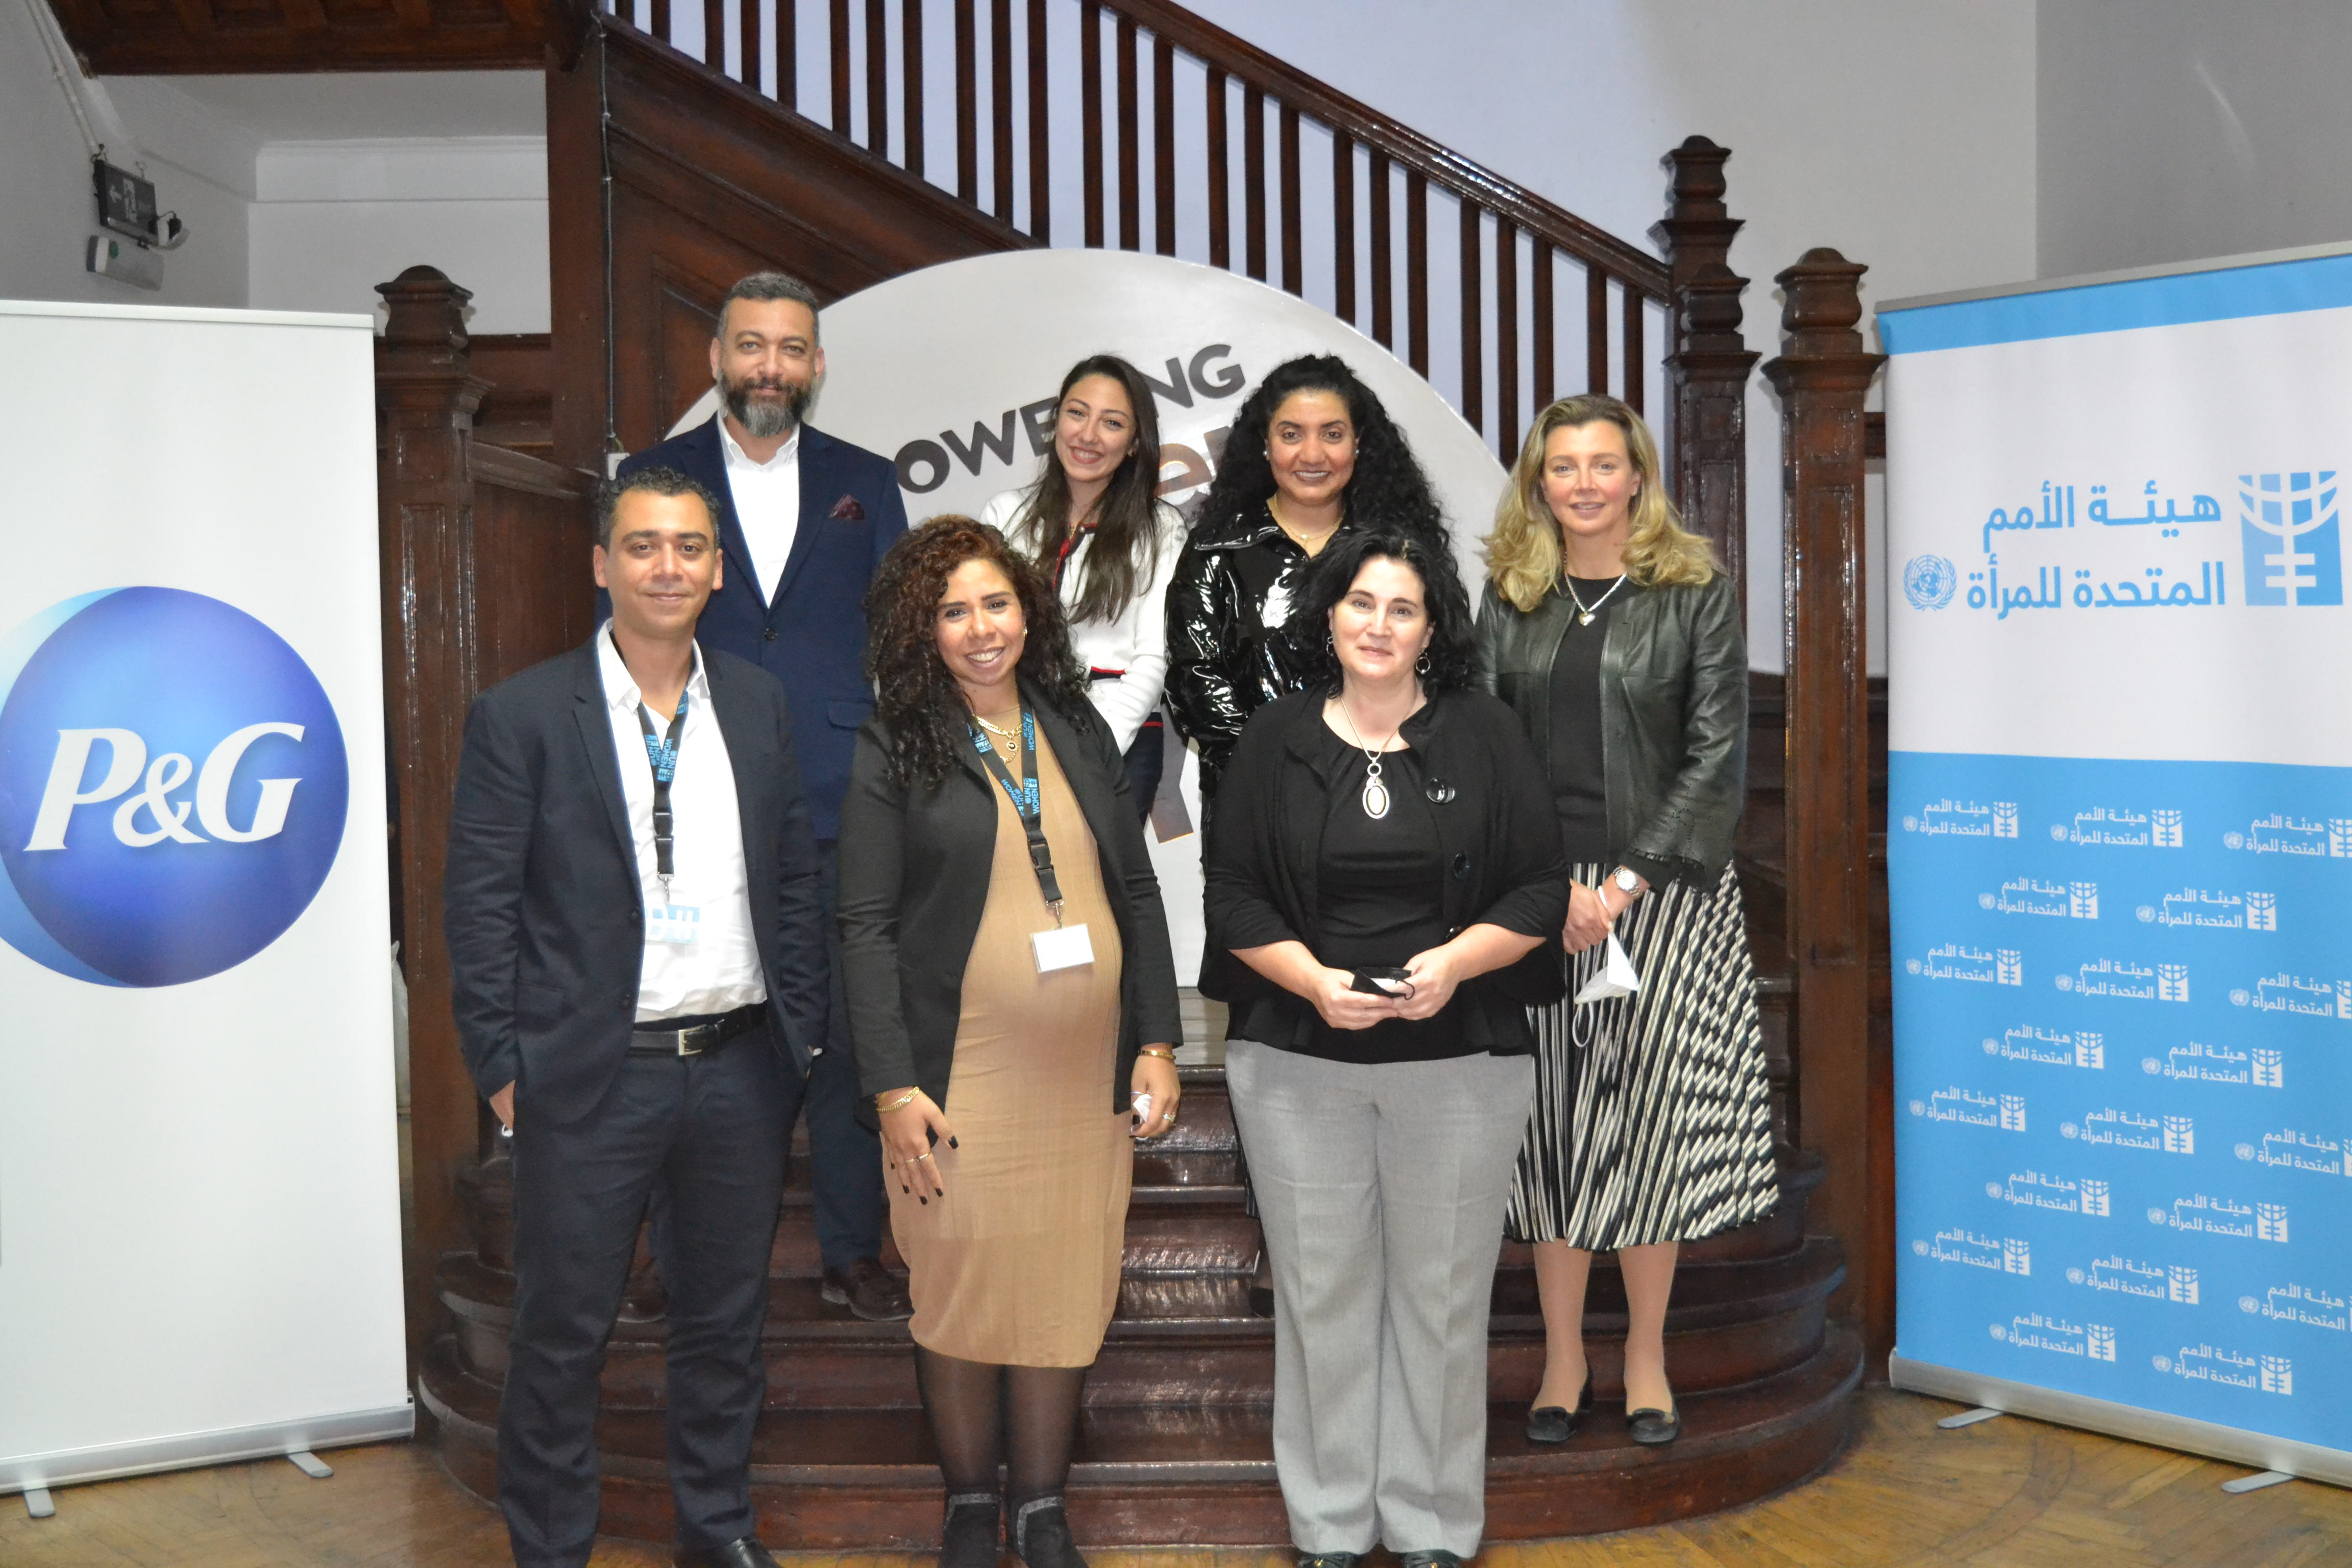 Representatives from UN Women Egypt and P&G Egypt during the official launch of the 3rd edition of their joint programme “Stimulating Equal Opportunities for Women Entrepreneurs” in Egypt on 9 February 2022. Photo: UN Women/Menna Negeda